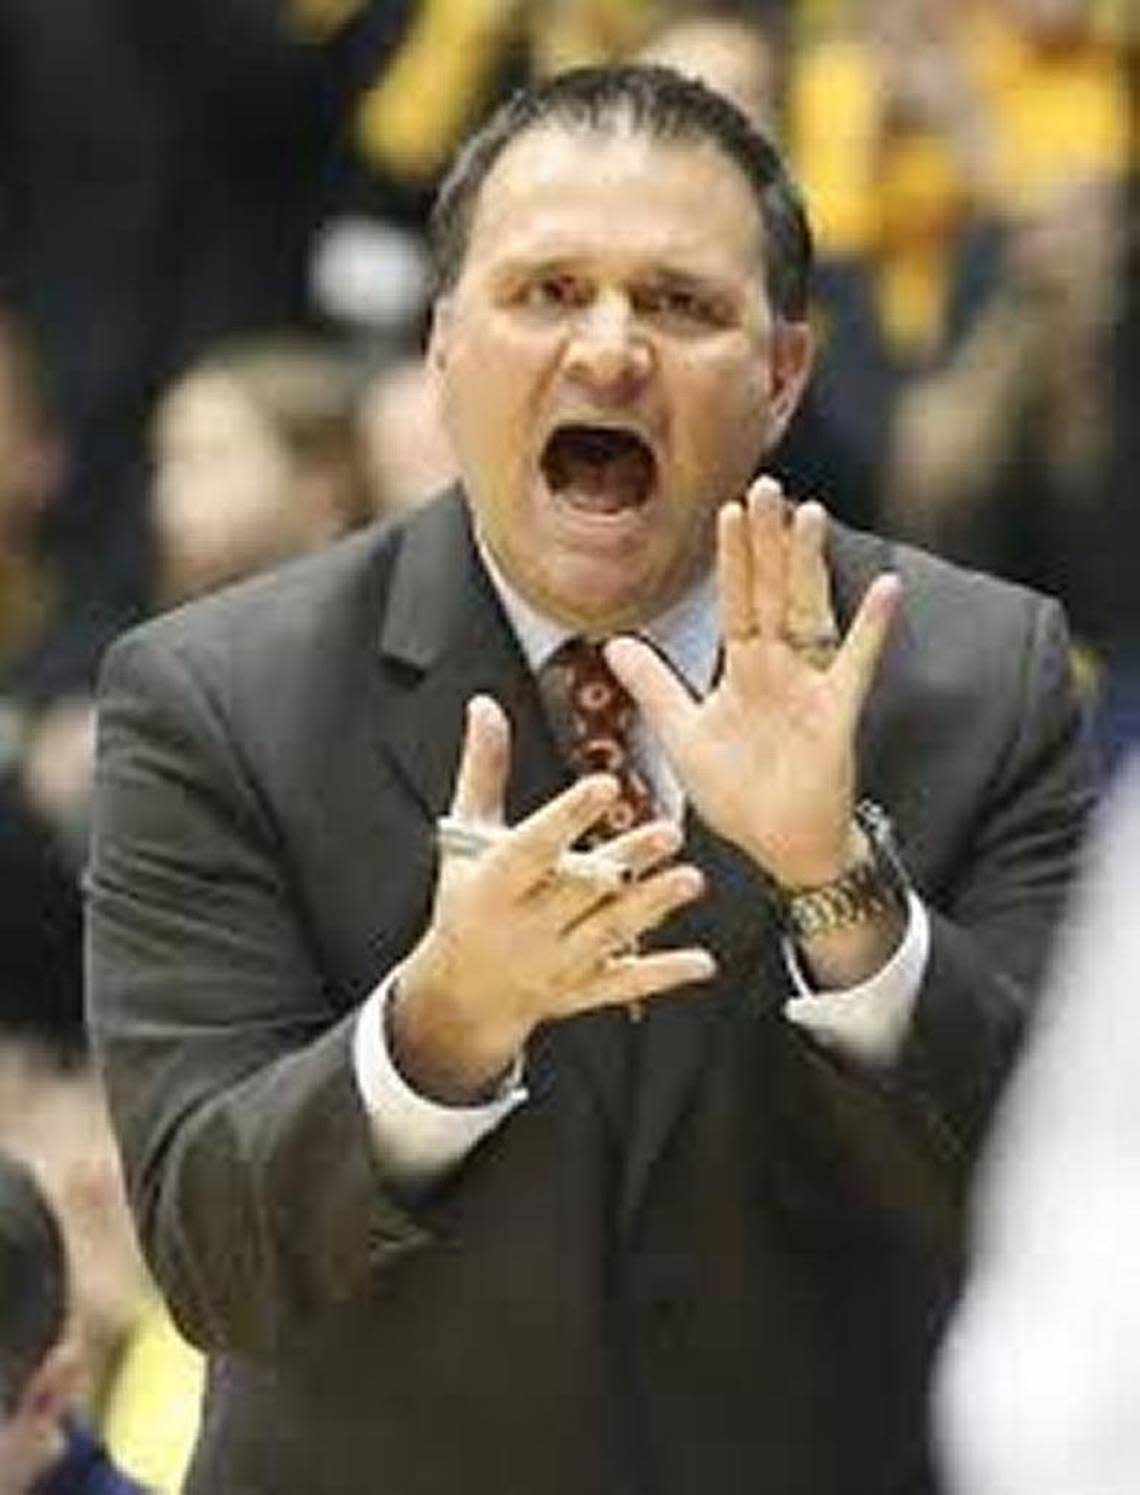 Chris Jans was elevated to associate head coach at Wichita State on Thursday.